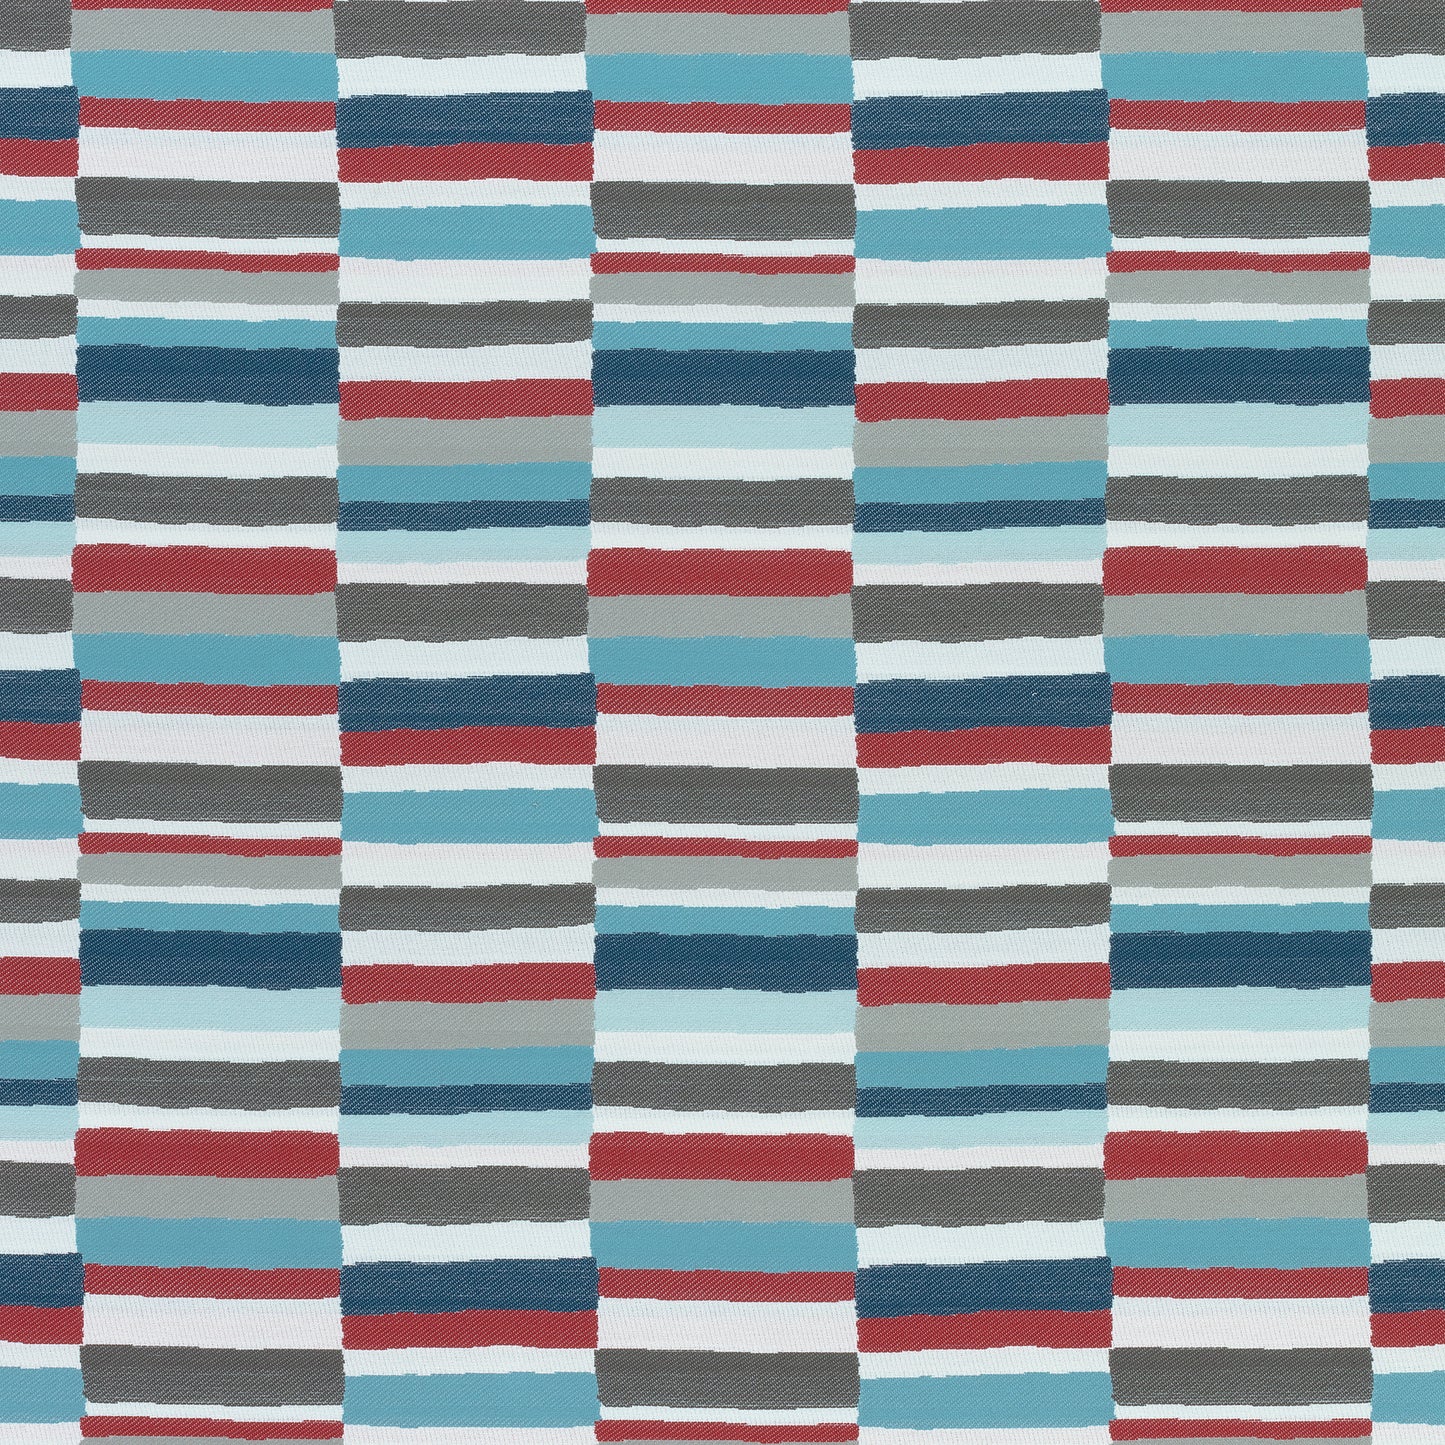 Purchase Thibaut Fabric Pattern number W74689 pattern name Carnivale color Teal and Cranberry